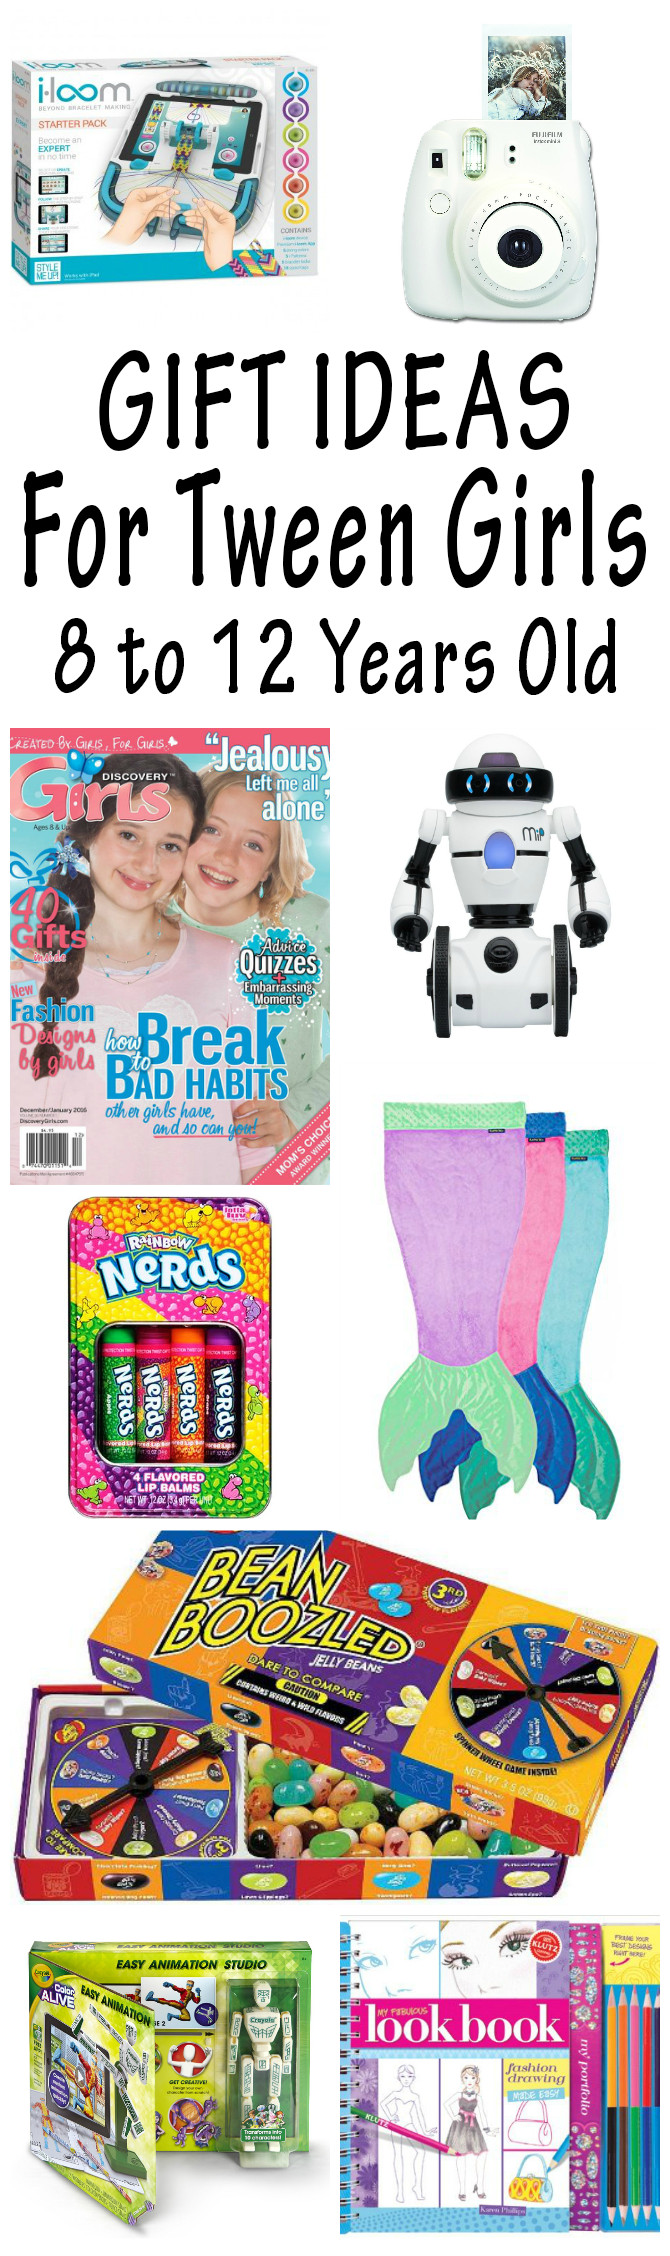 12 Year Old Christmas Gift Ideas
 Gift Ideas For Tween Girls They Will Love 2017 Christmas